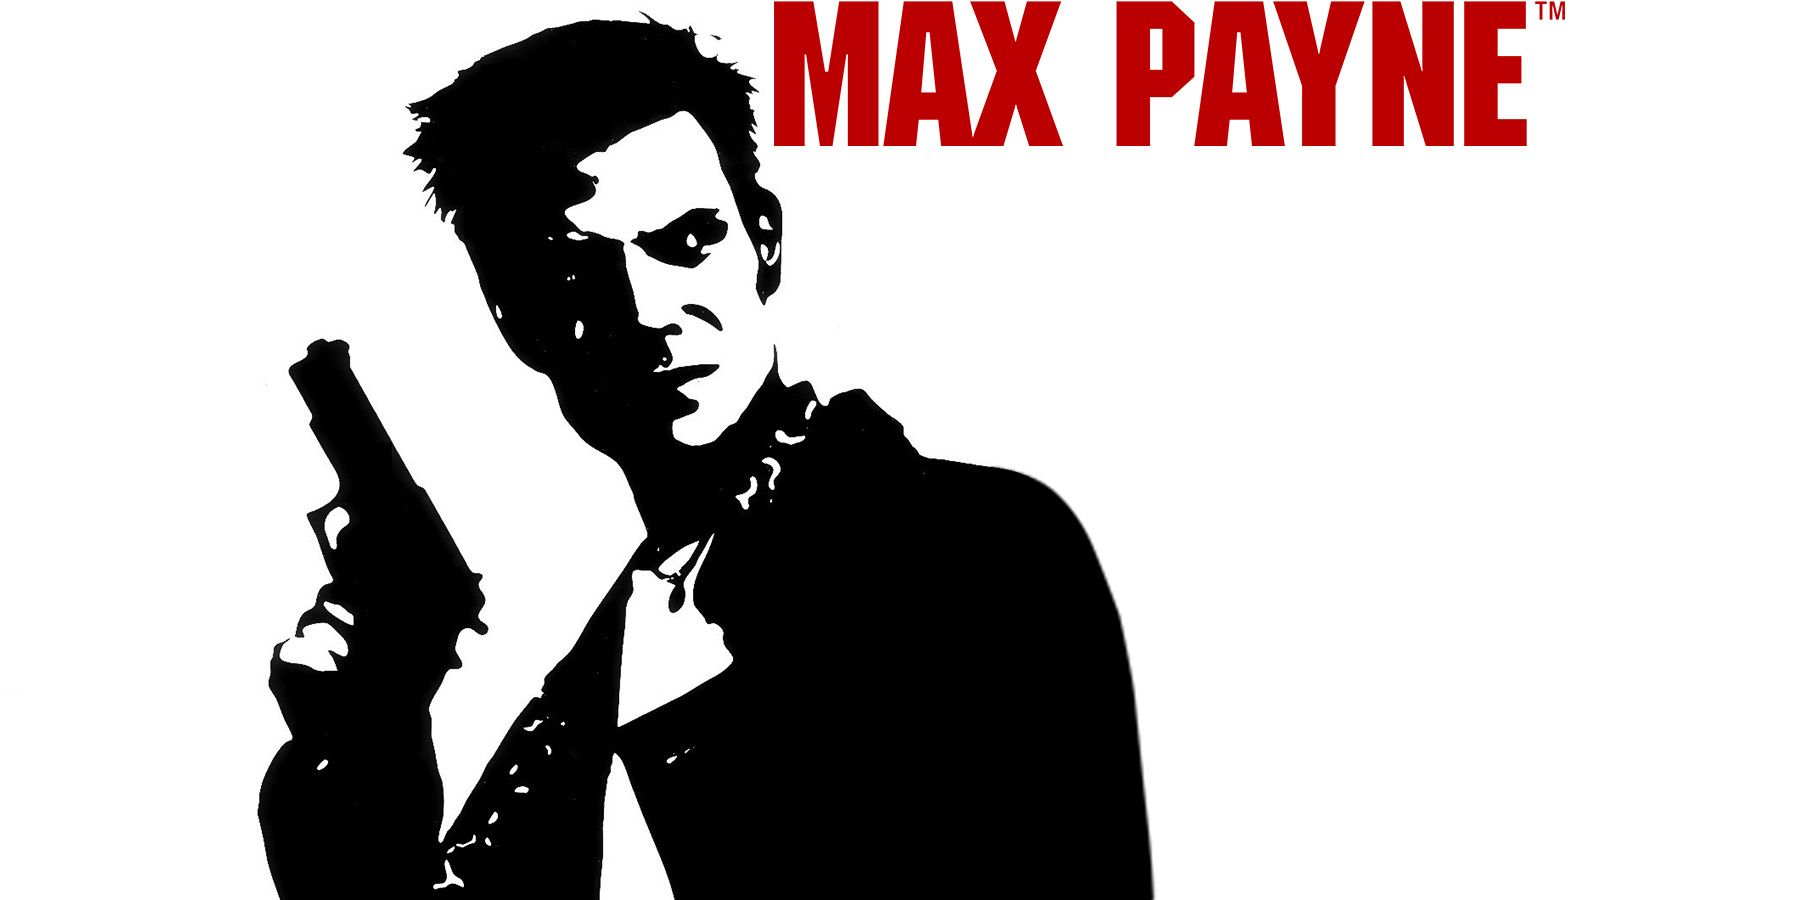 Max Payne 1 silhouette character concept artwork on white background with red game logo